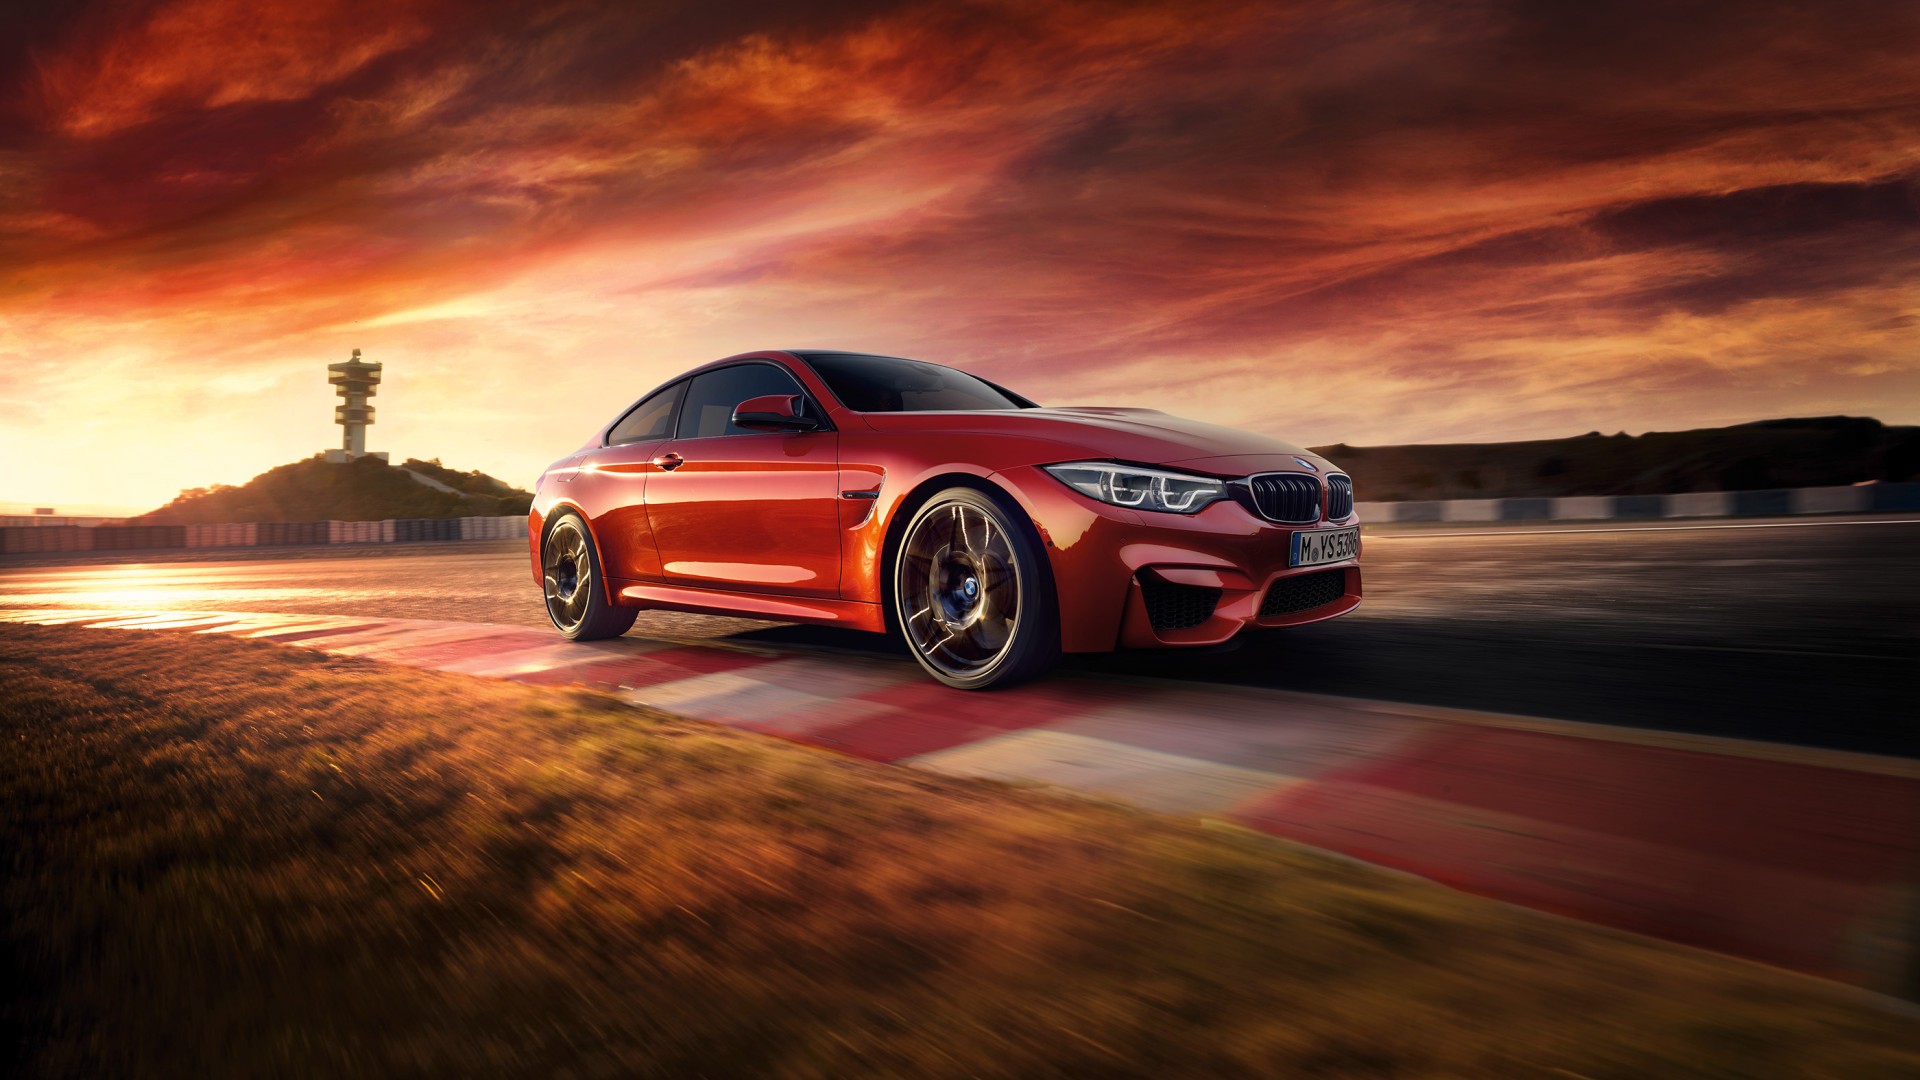 BMW M4 Coupe 2022 Wallpaper HD Car Wallpapers ID 8087